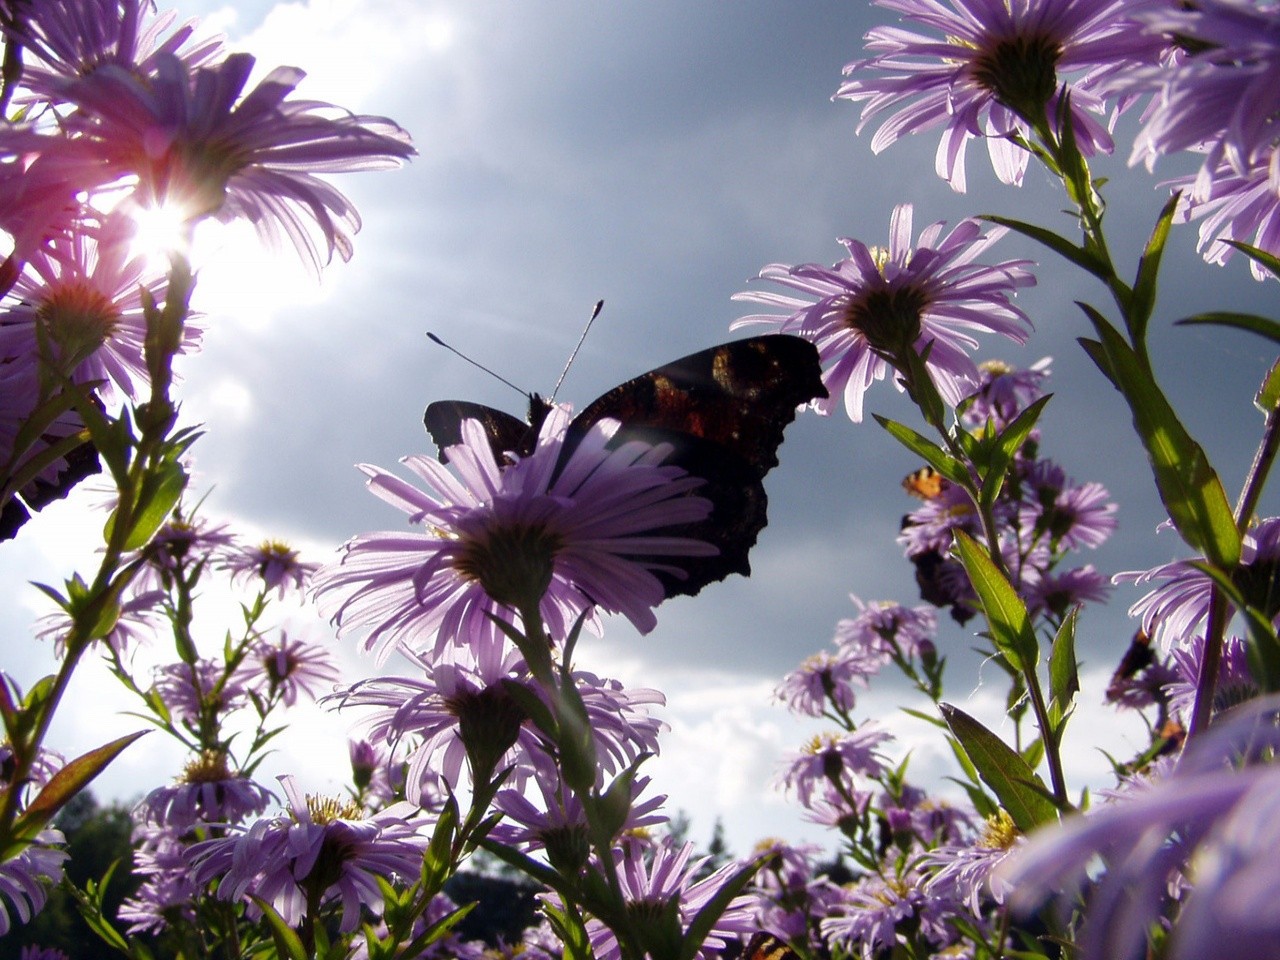 General 1280x960 butterfly purple flowers flowers nature sunlight worm's eye view low-angle insect